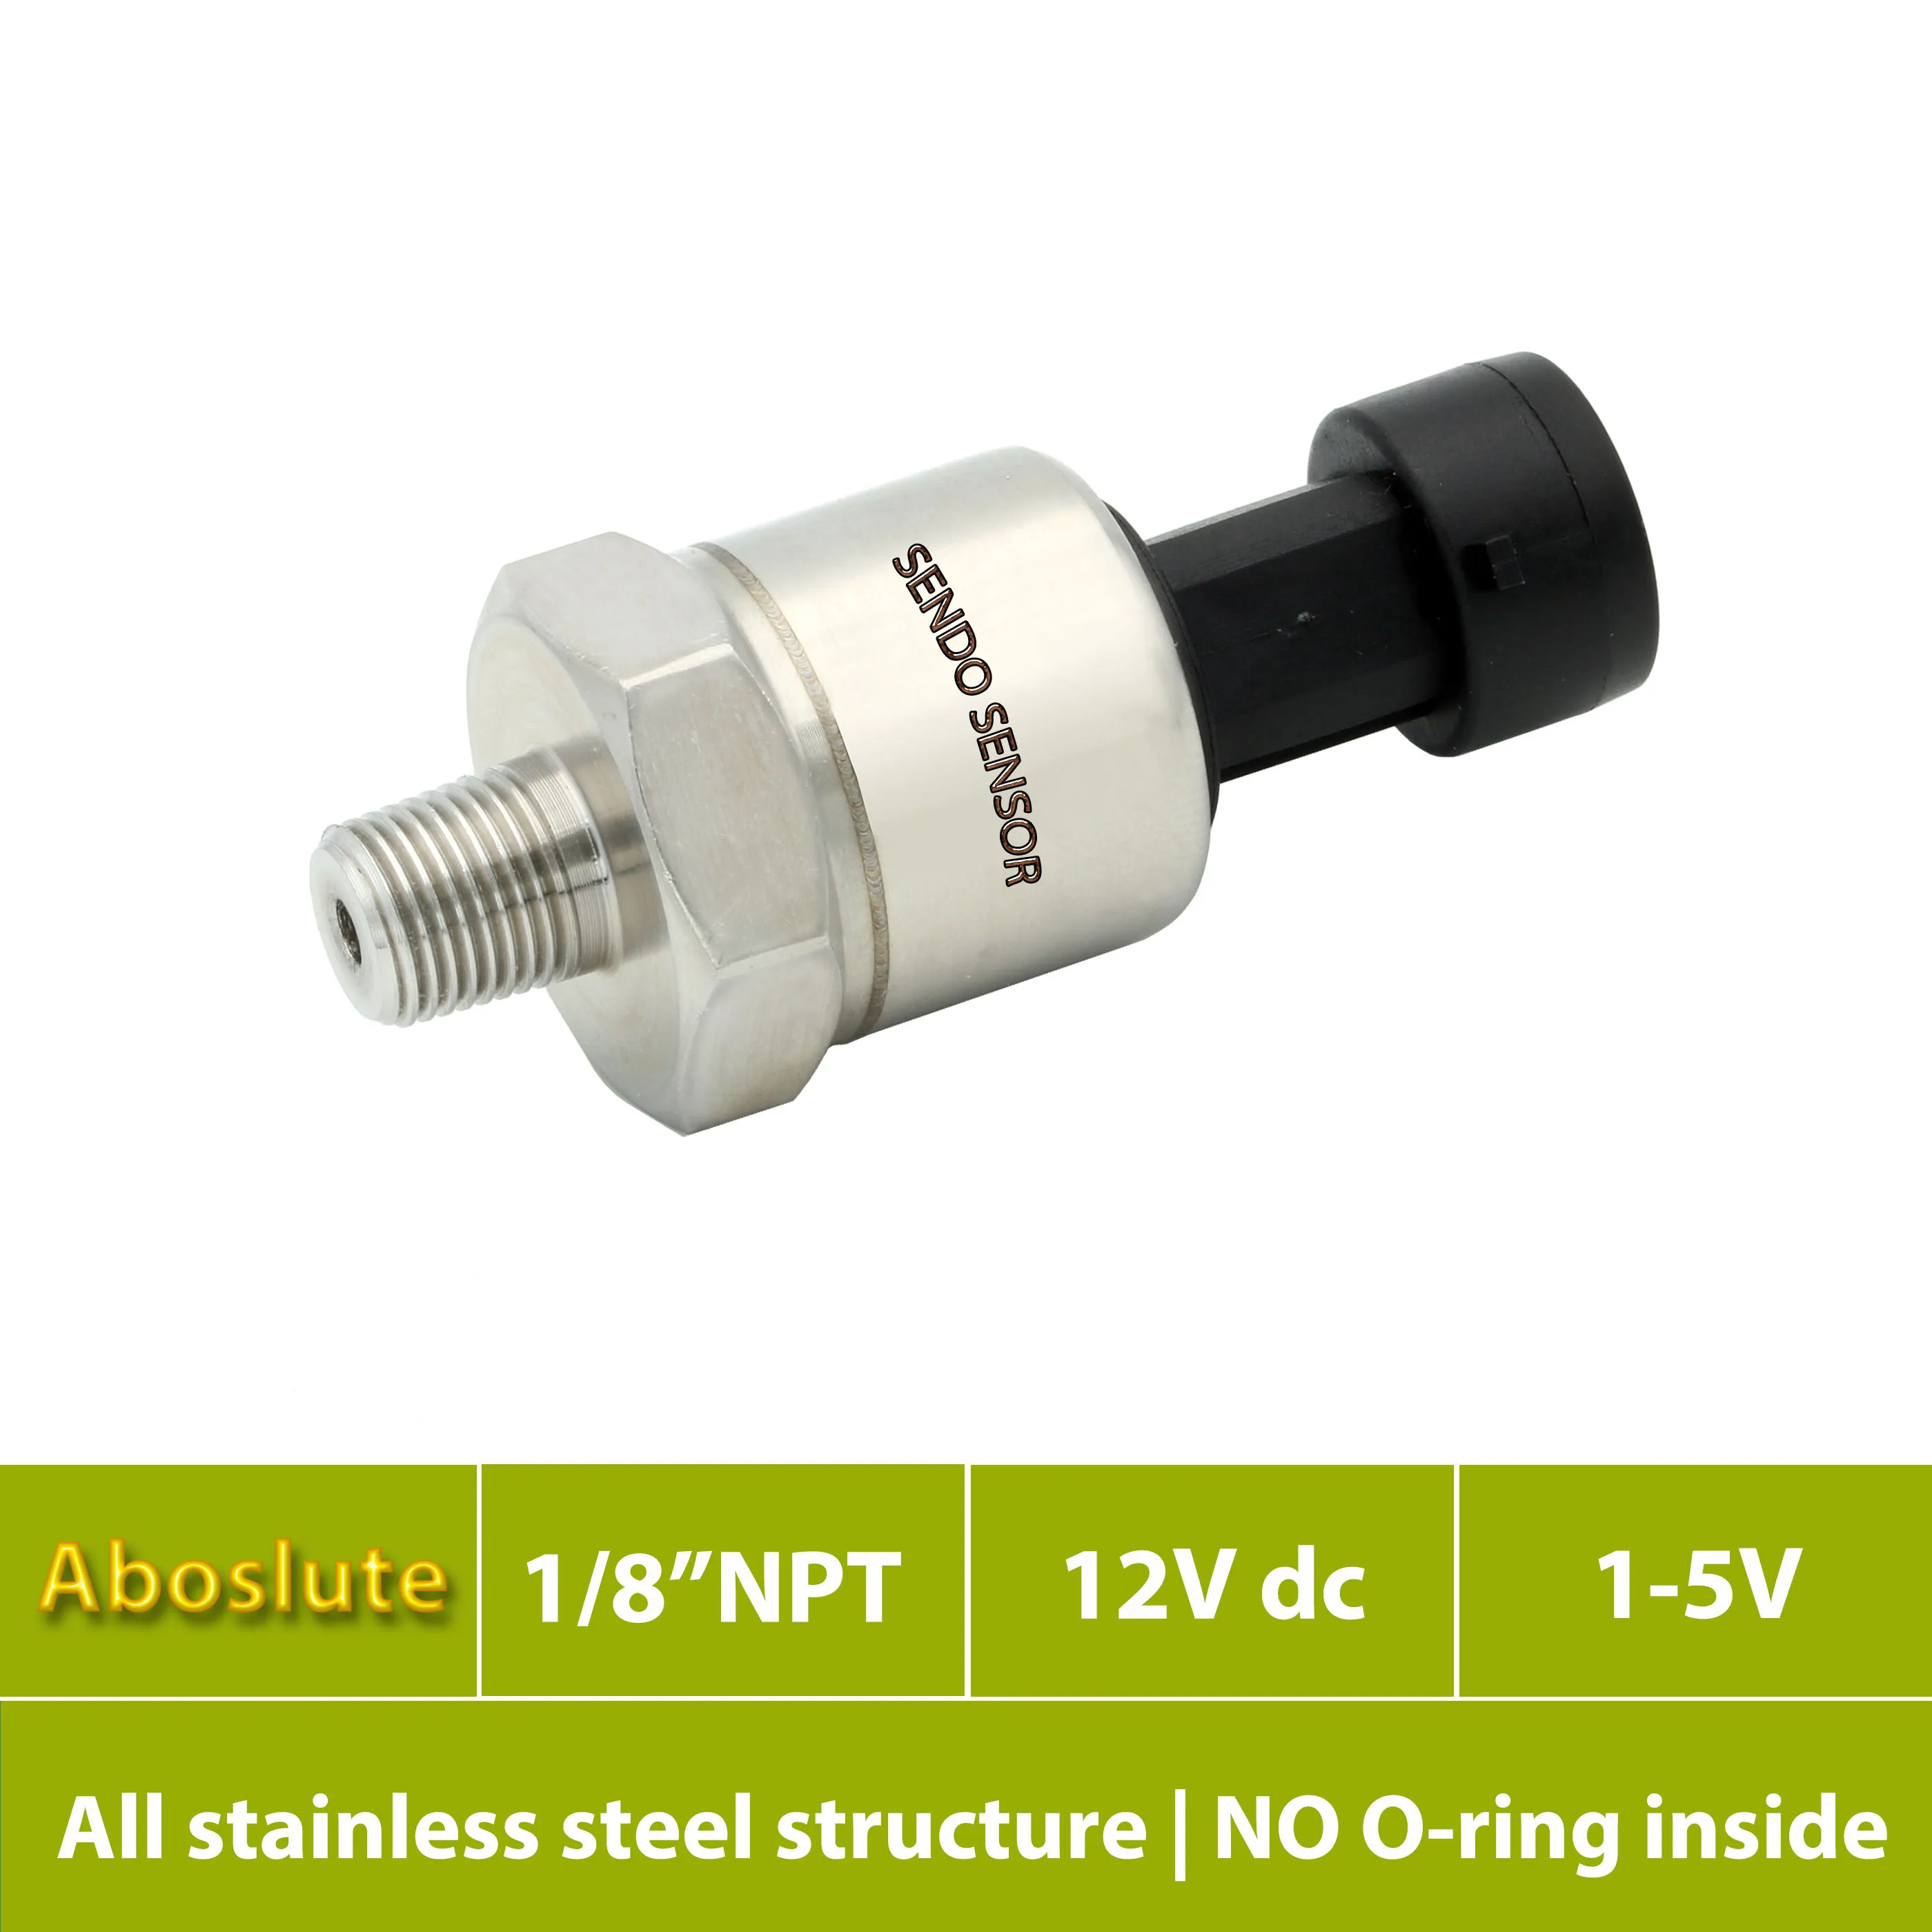 12V isolated stainless steel sensor, no sealing elements, 1 5 v output, absolute 1, 2, 2.5, 4, 5, 6, 10, 12, 16, 20, 25, 40 bar